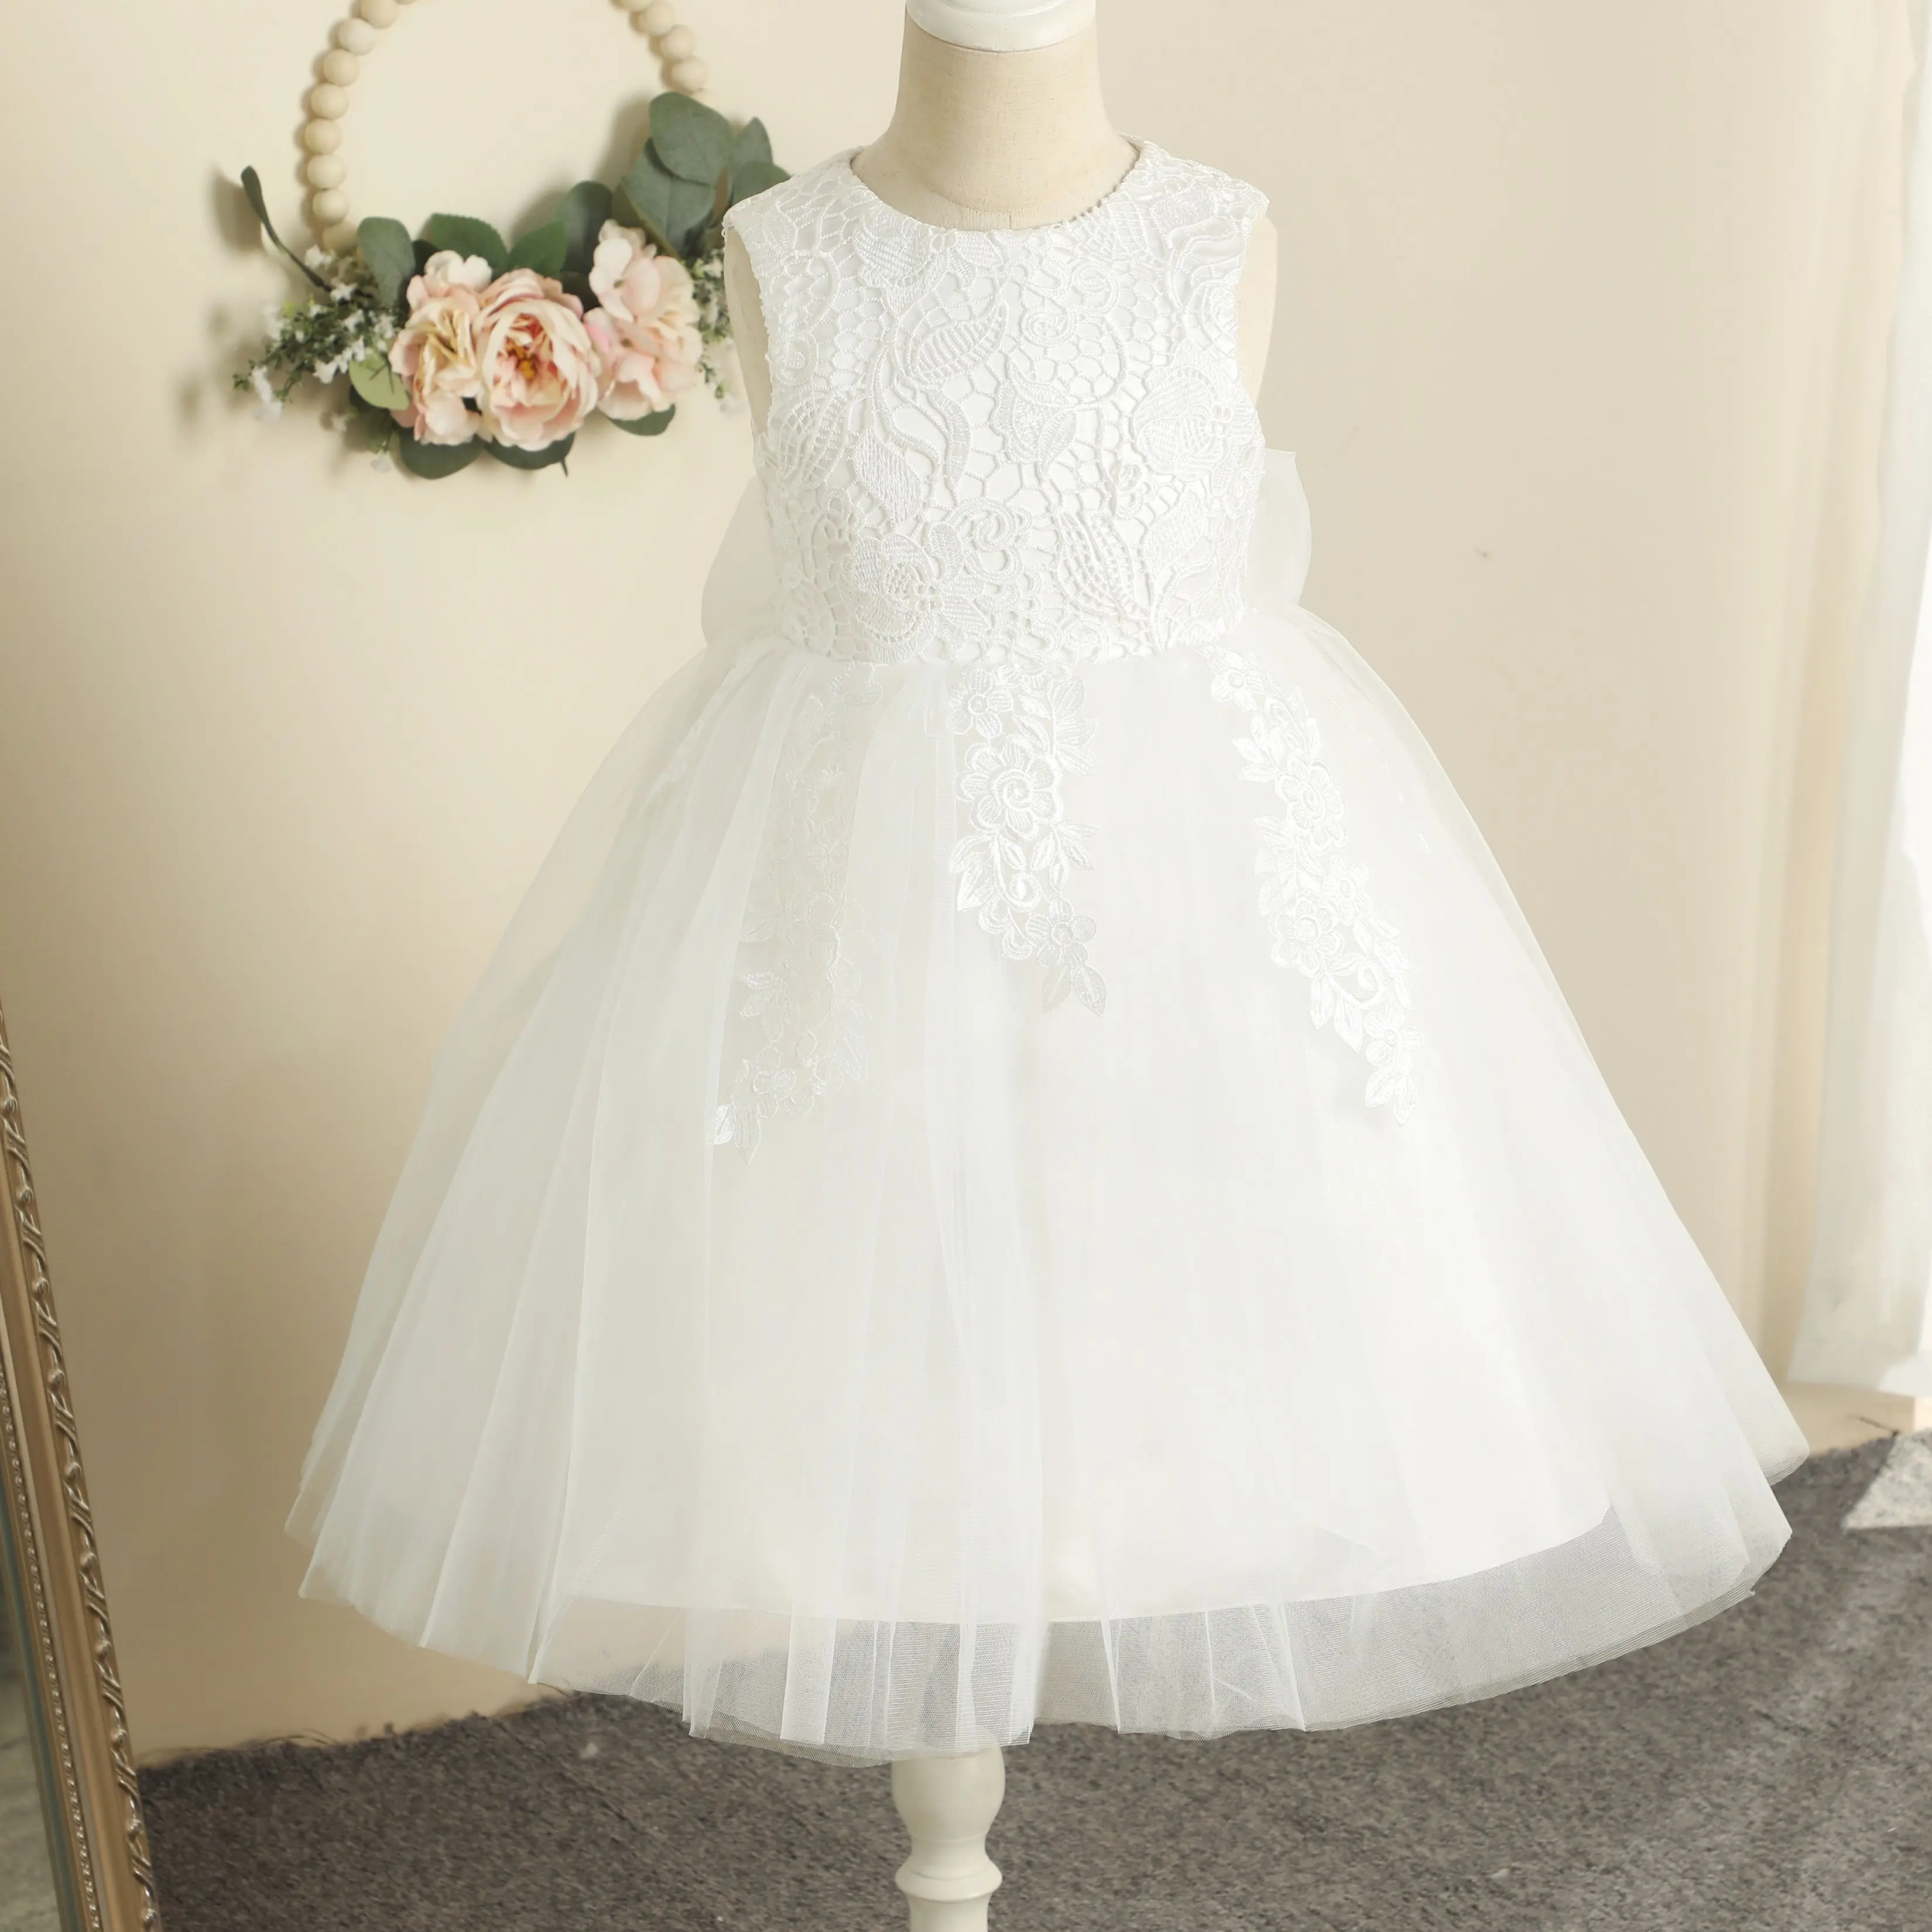 

Dreamgirl Ivory Flower Girl Dresses Child Wedding Party Dresses Appliques Lace Zipper Bow Sleeveless A-Line فساتين حفلات للبنات